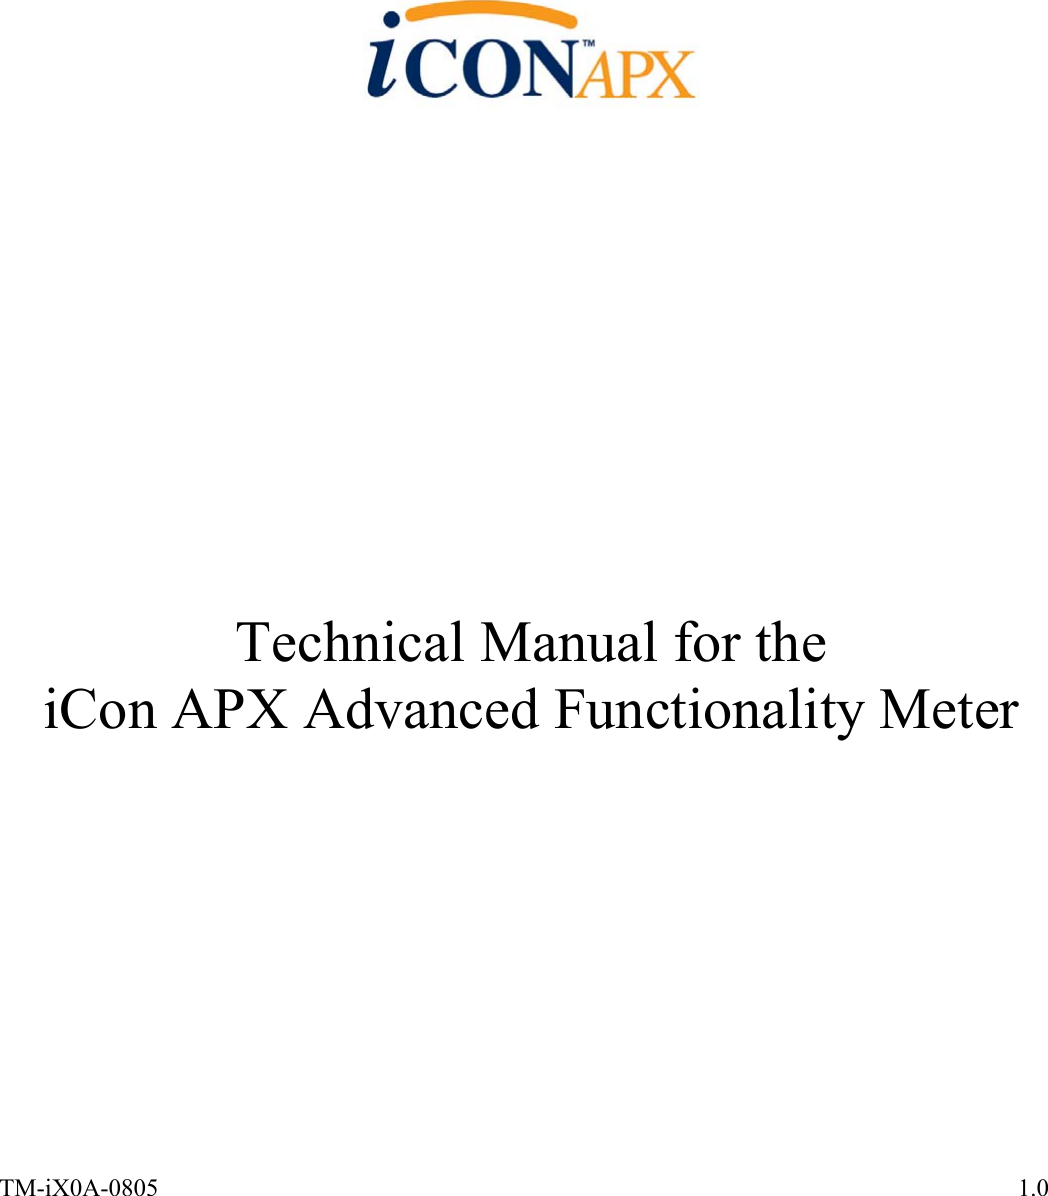         Technical Manual for the iCon APX Advanced Functionality Meter  TM-iX0A-0805  1.0 